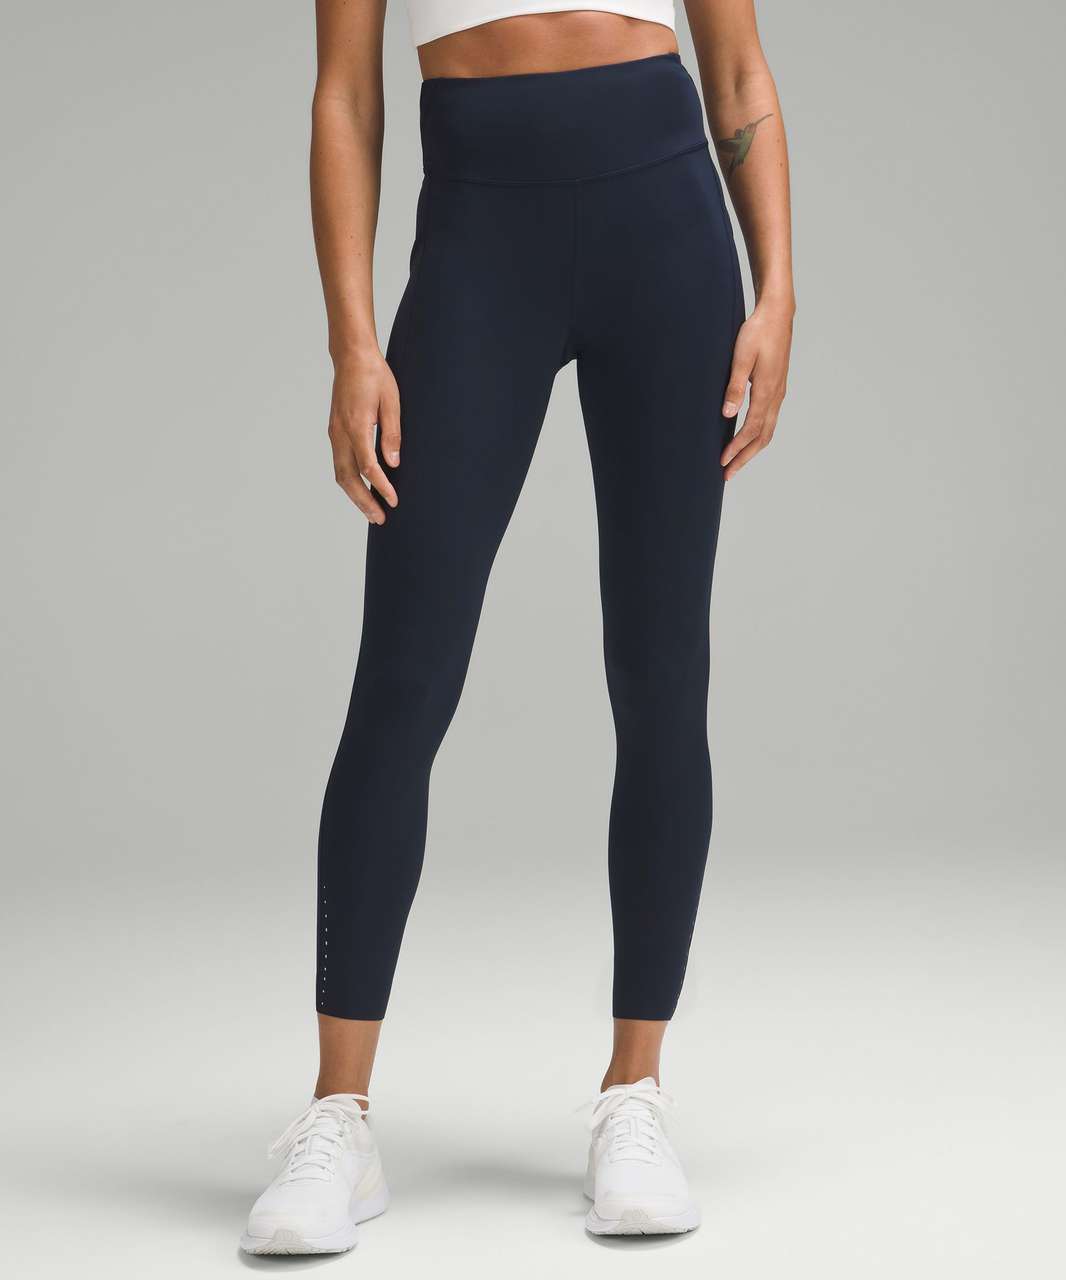 Lululemon Fast and Free High-Rise Tight 25 *Pockets - True Navy